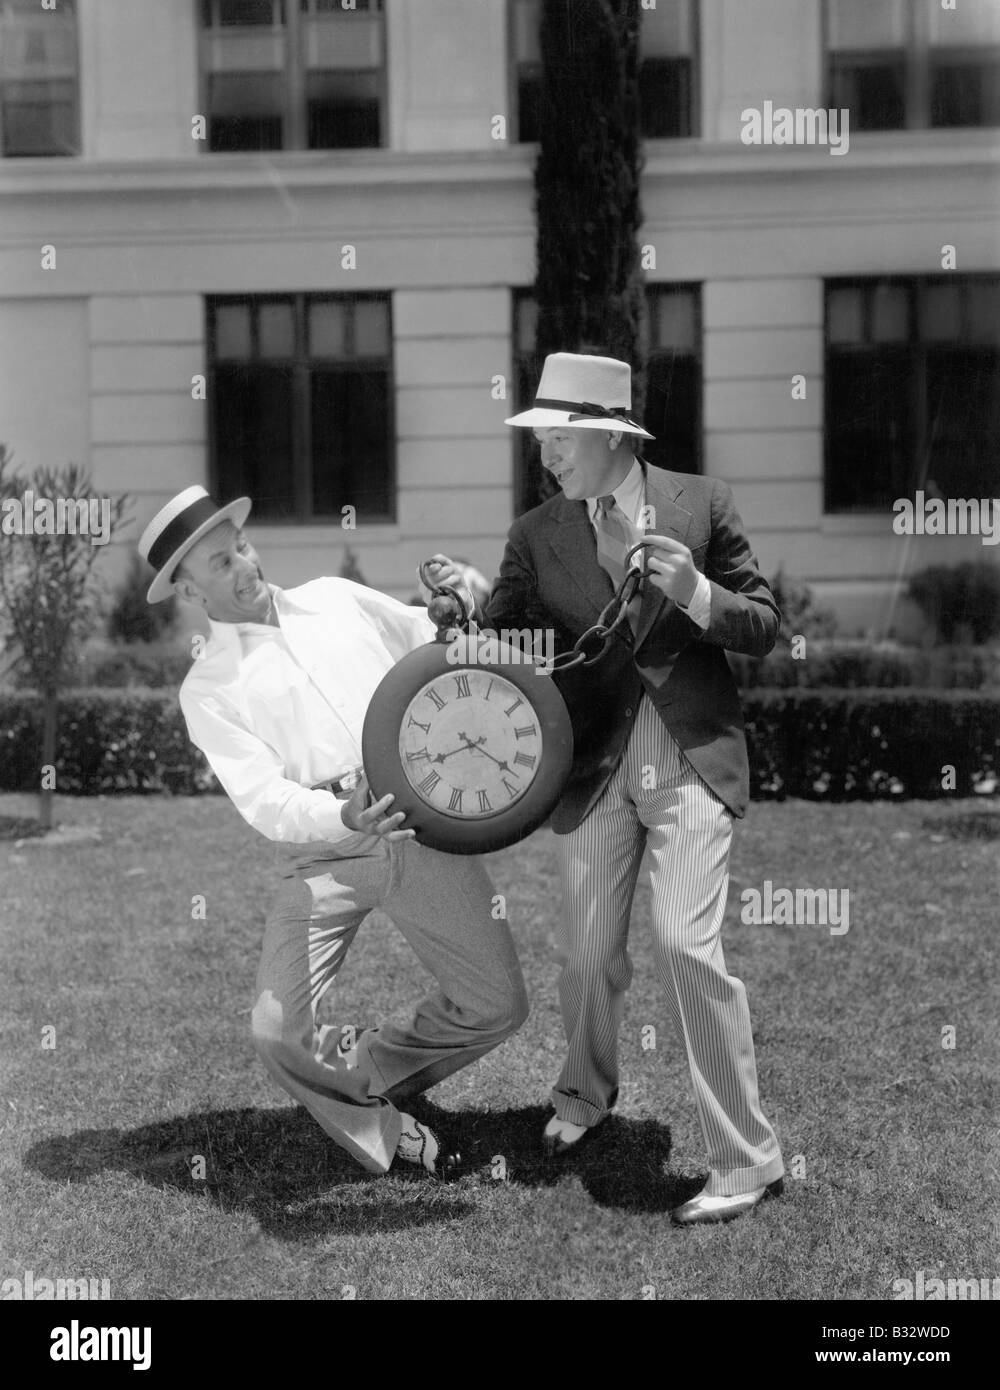 Two men wrestling with an oversized pocket watch Stock Photo